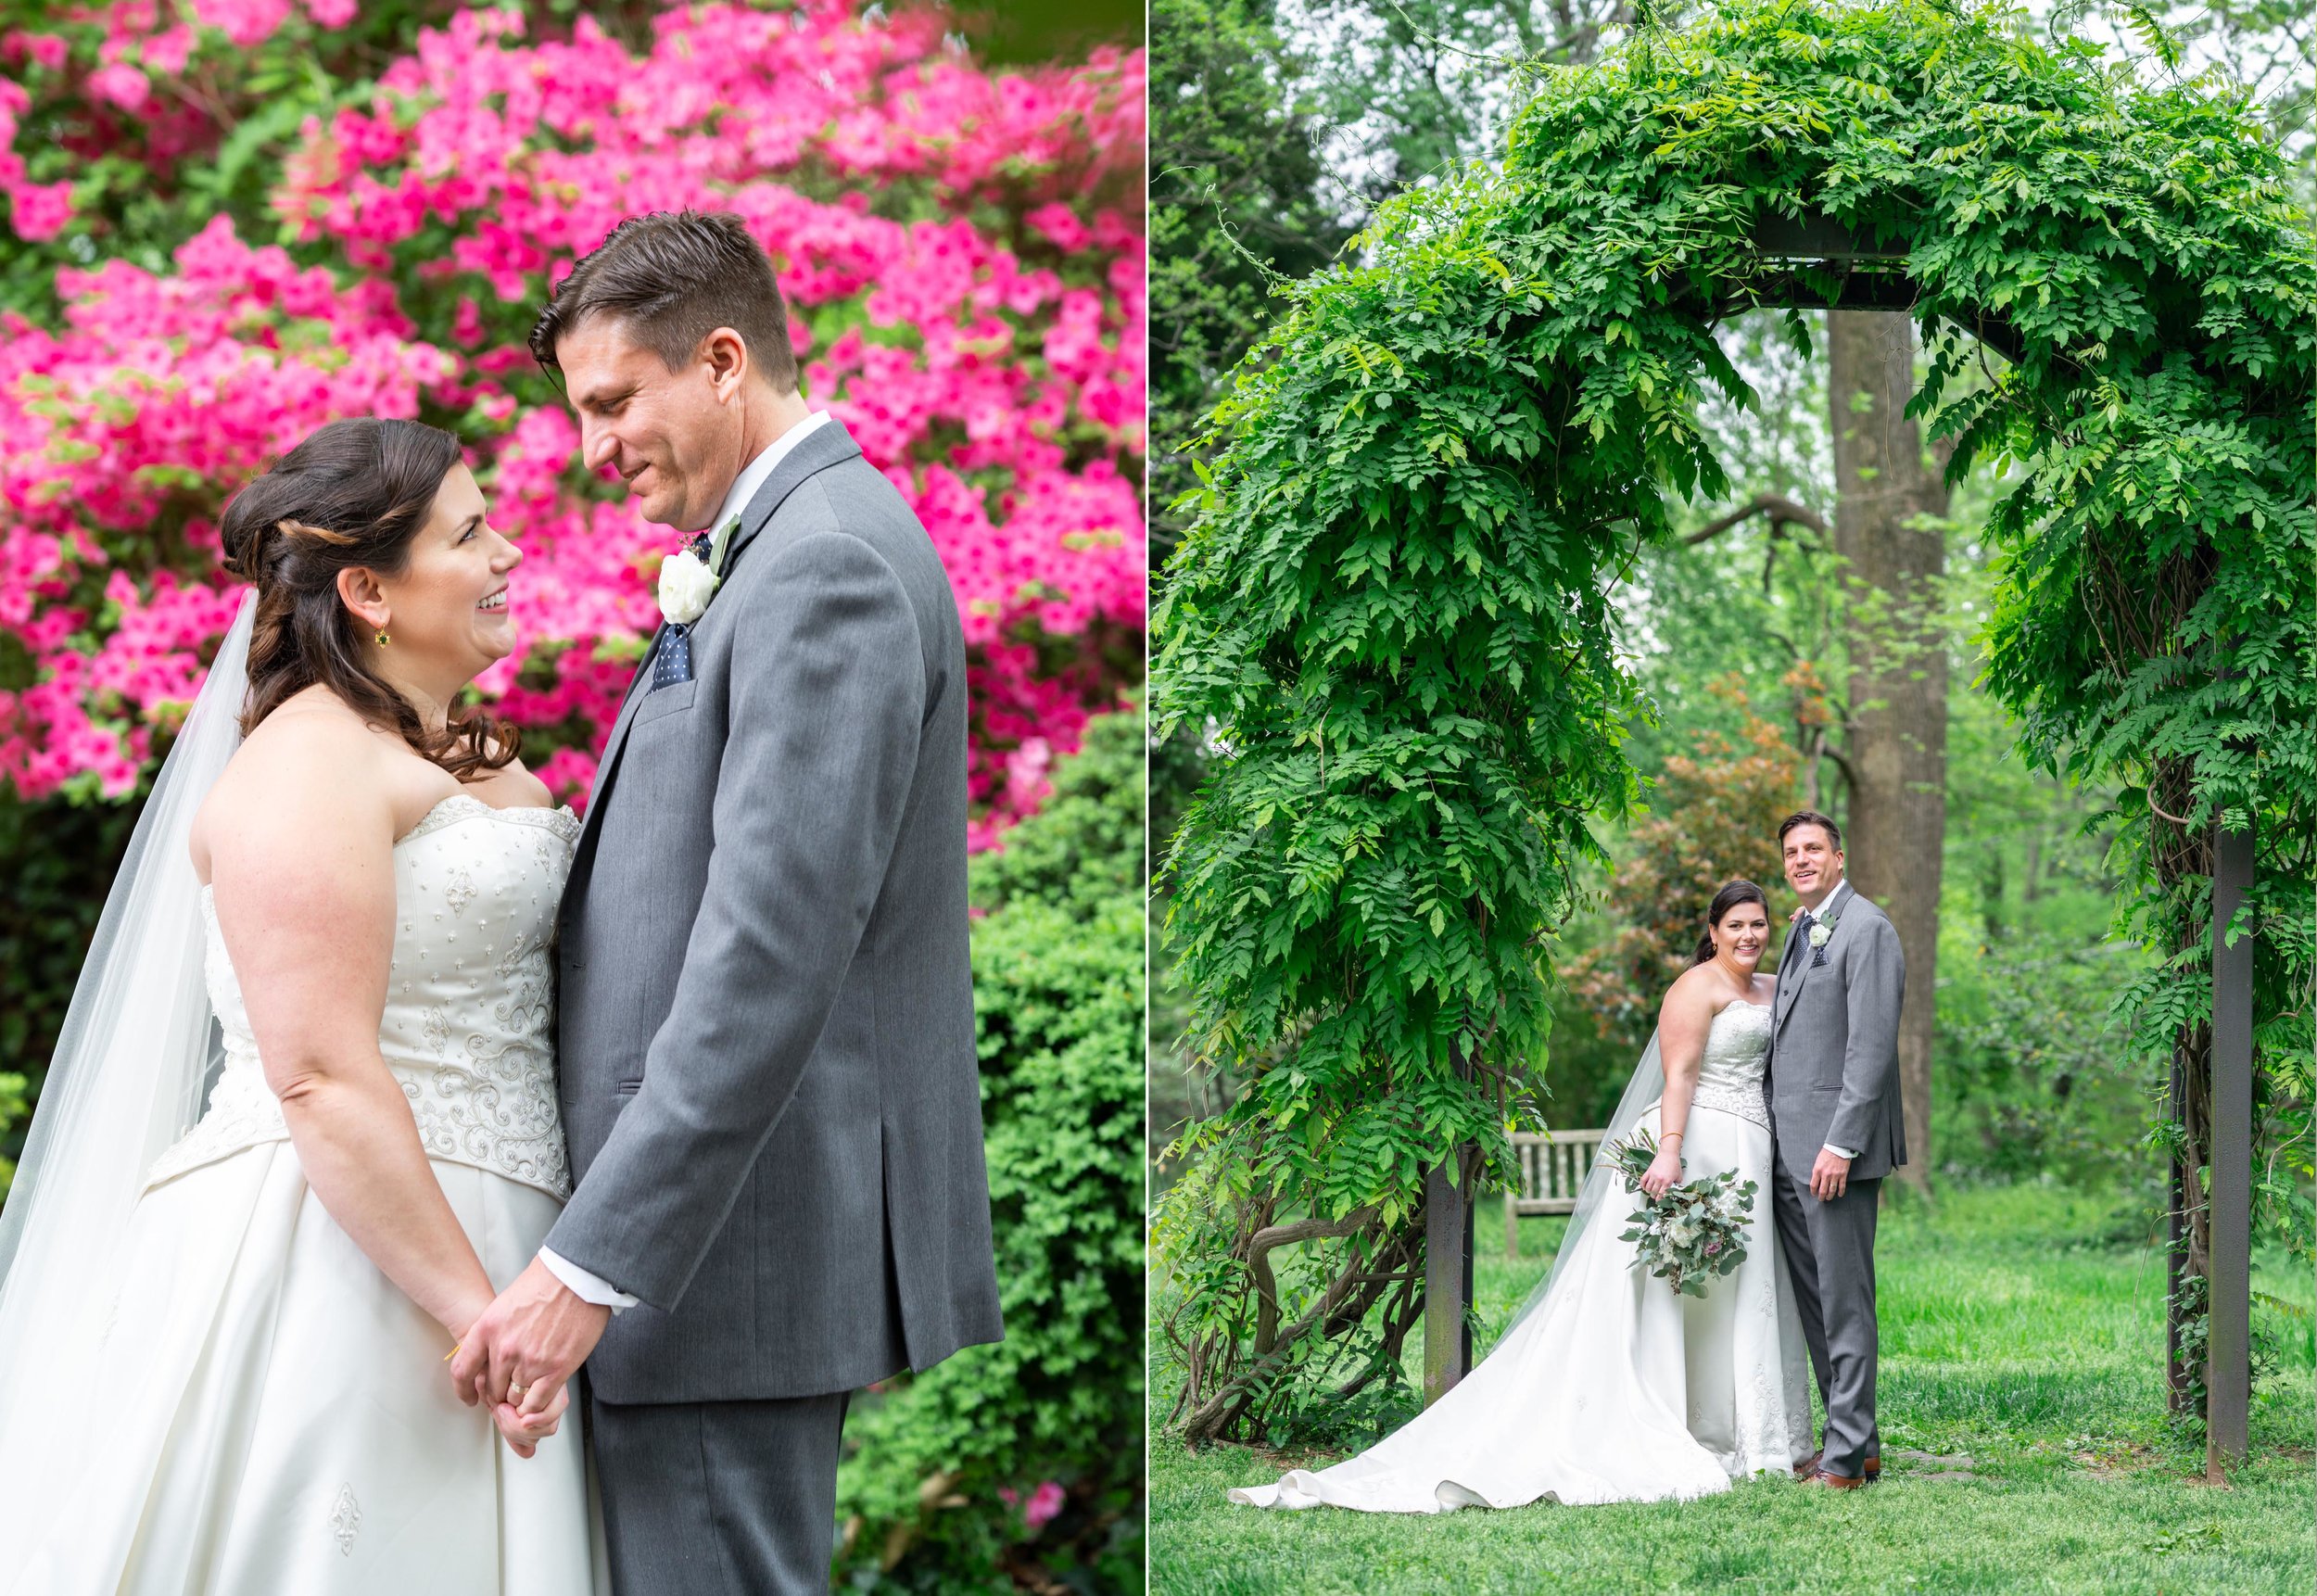 Portrait in front of pink azaleas (left) and under ivy arch (right) at Hendry House wedding